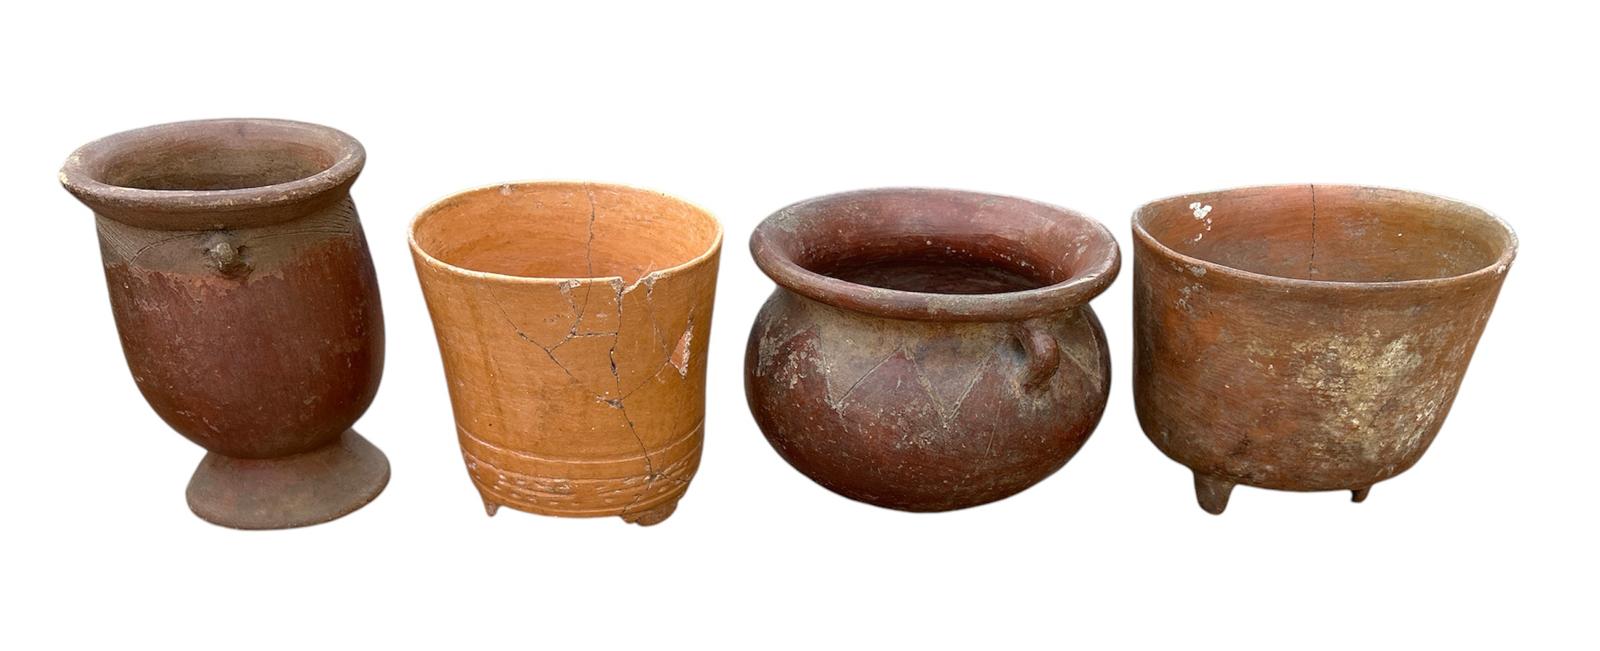 A COLLECTION OF FOUR SOUTH AMERICAN POTTERY BOWLS Two with handles and two with tripod legs. (